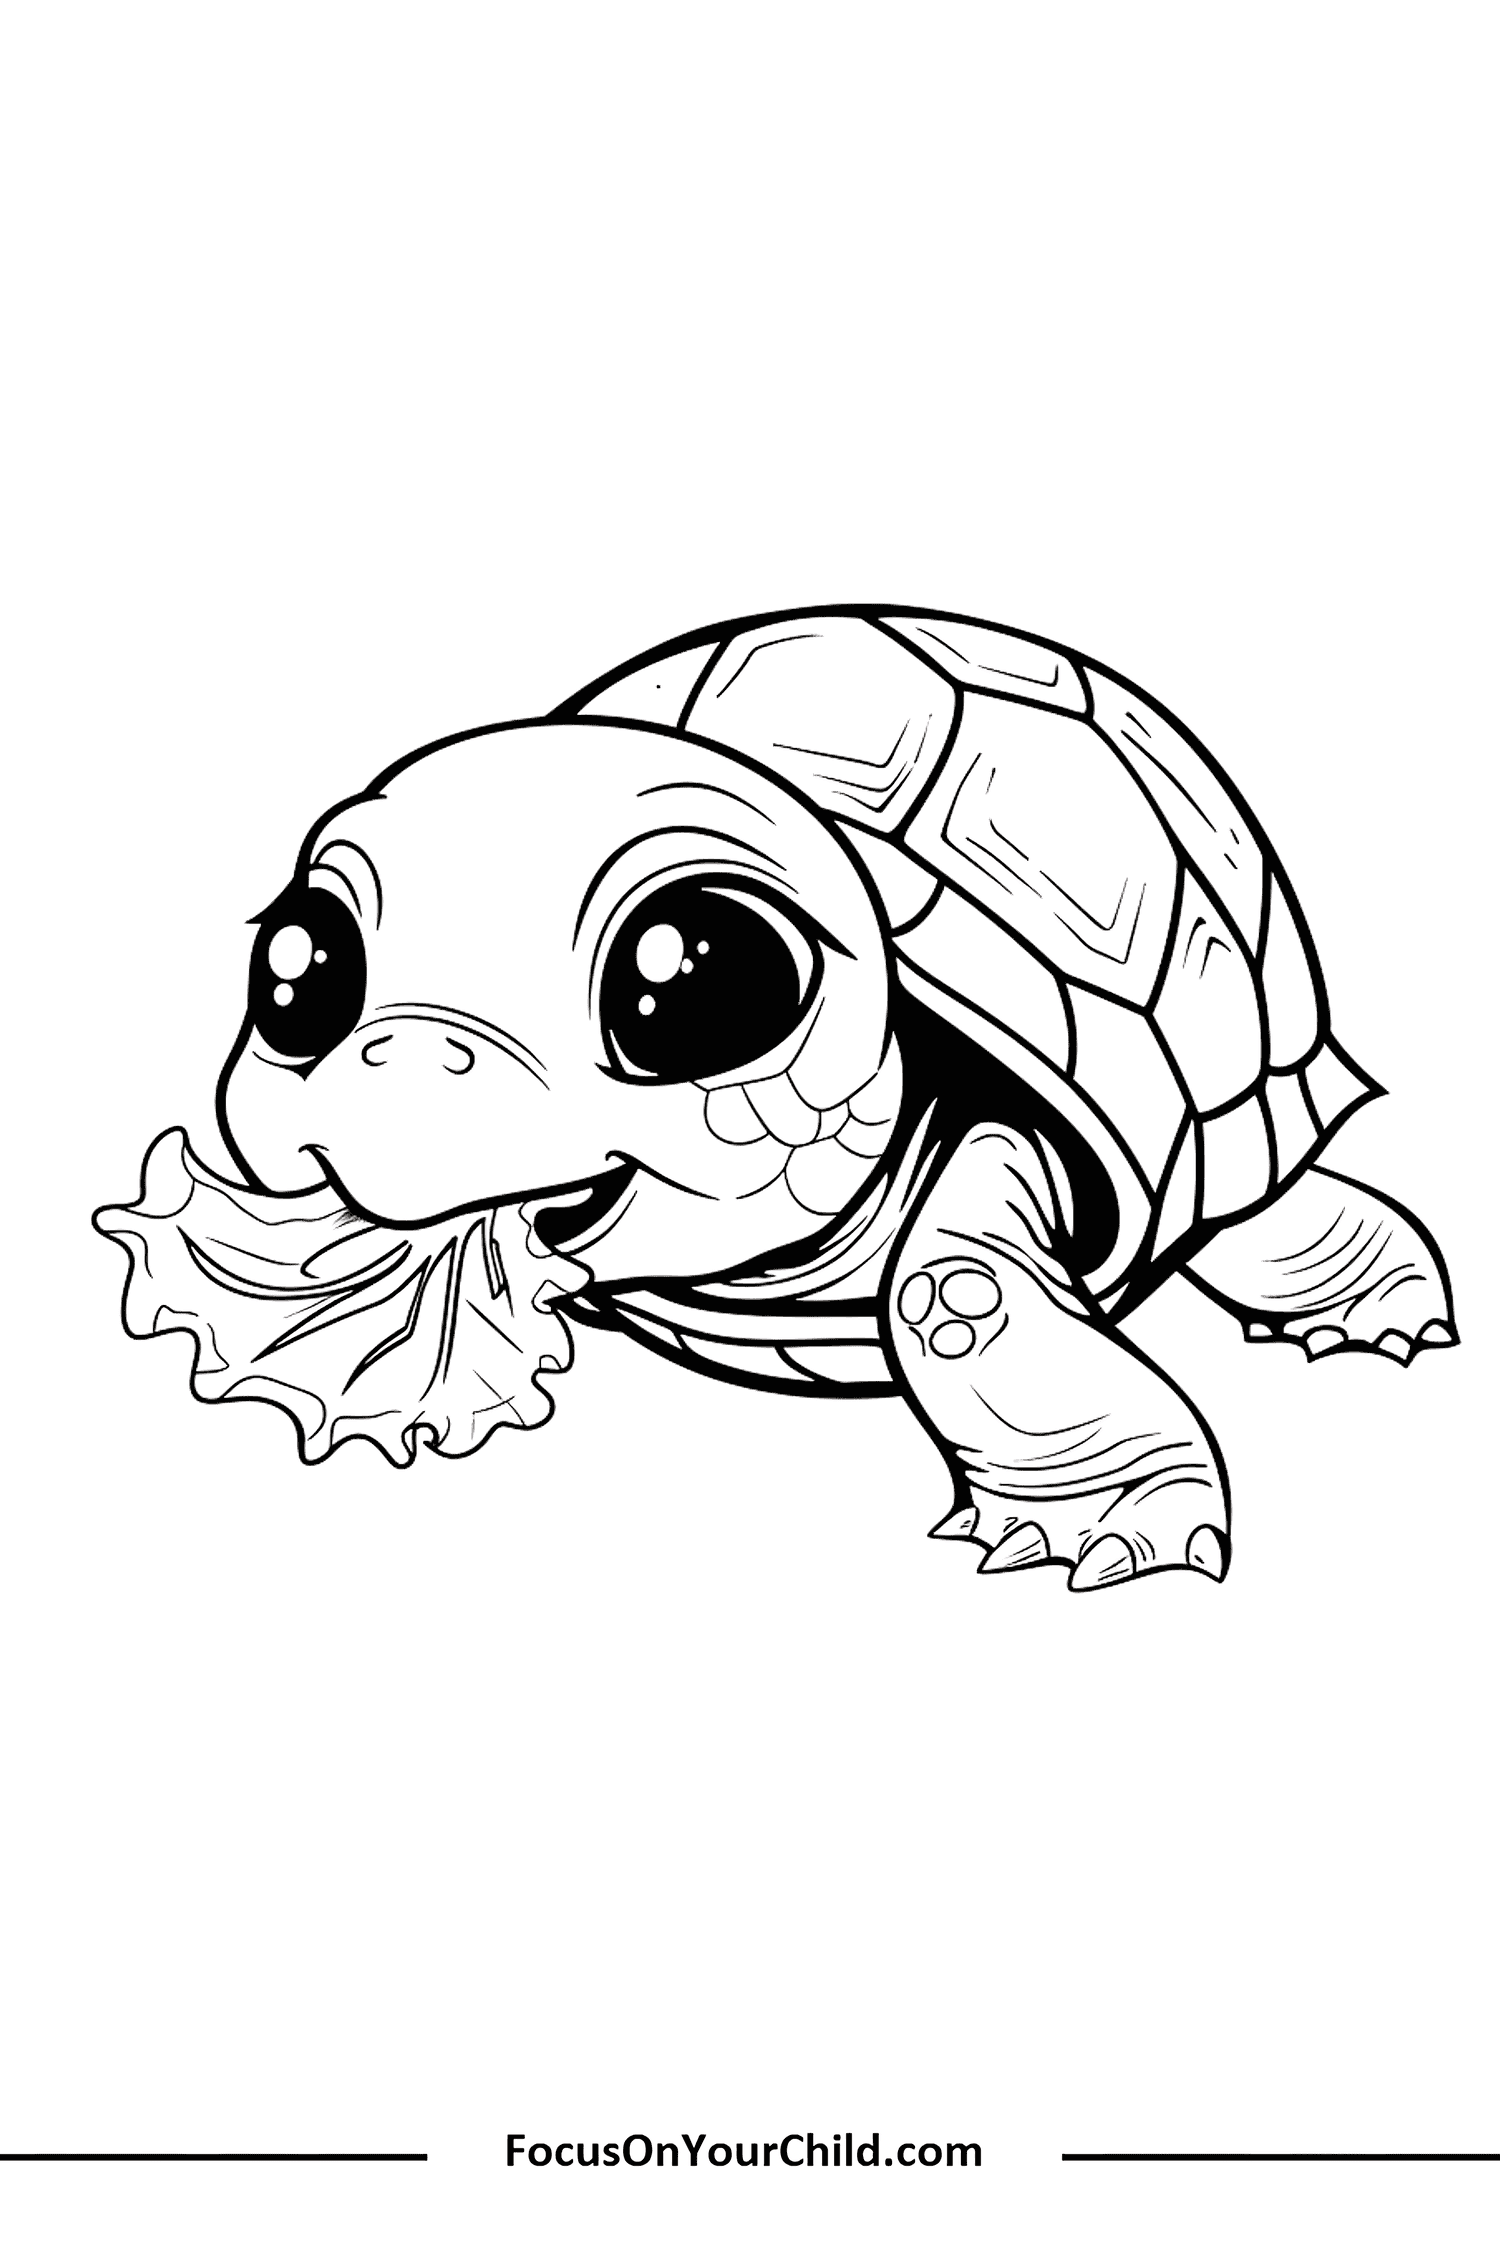 Detailed drawing of a cute turtle chewing lettuce, perfect for coloring and educational purposes.